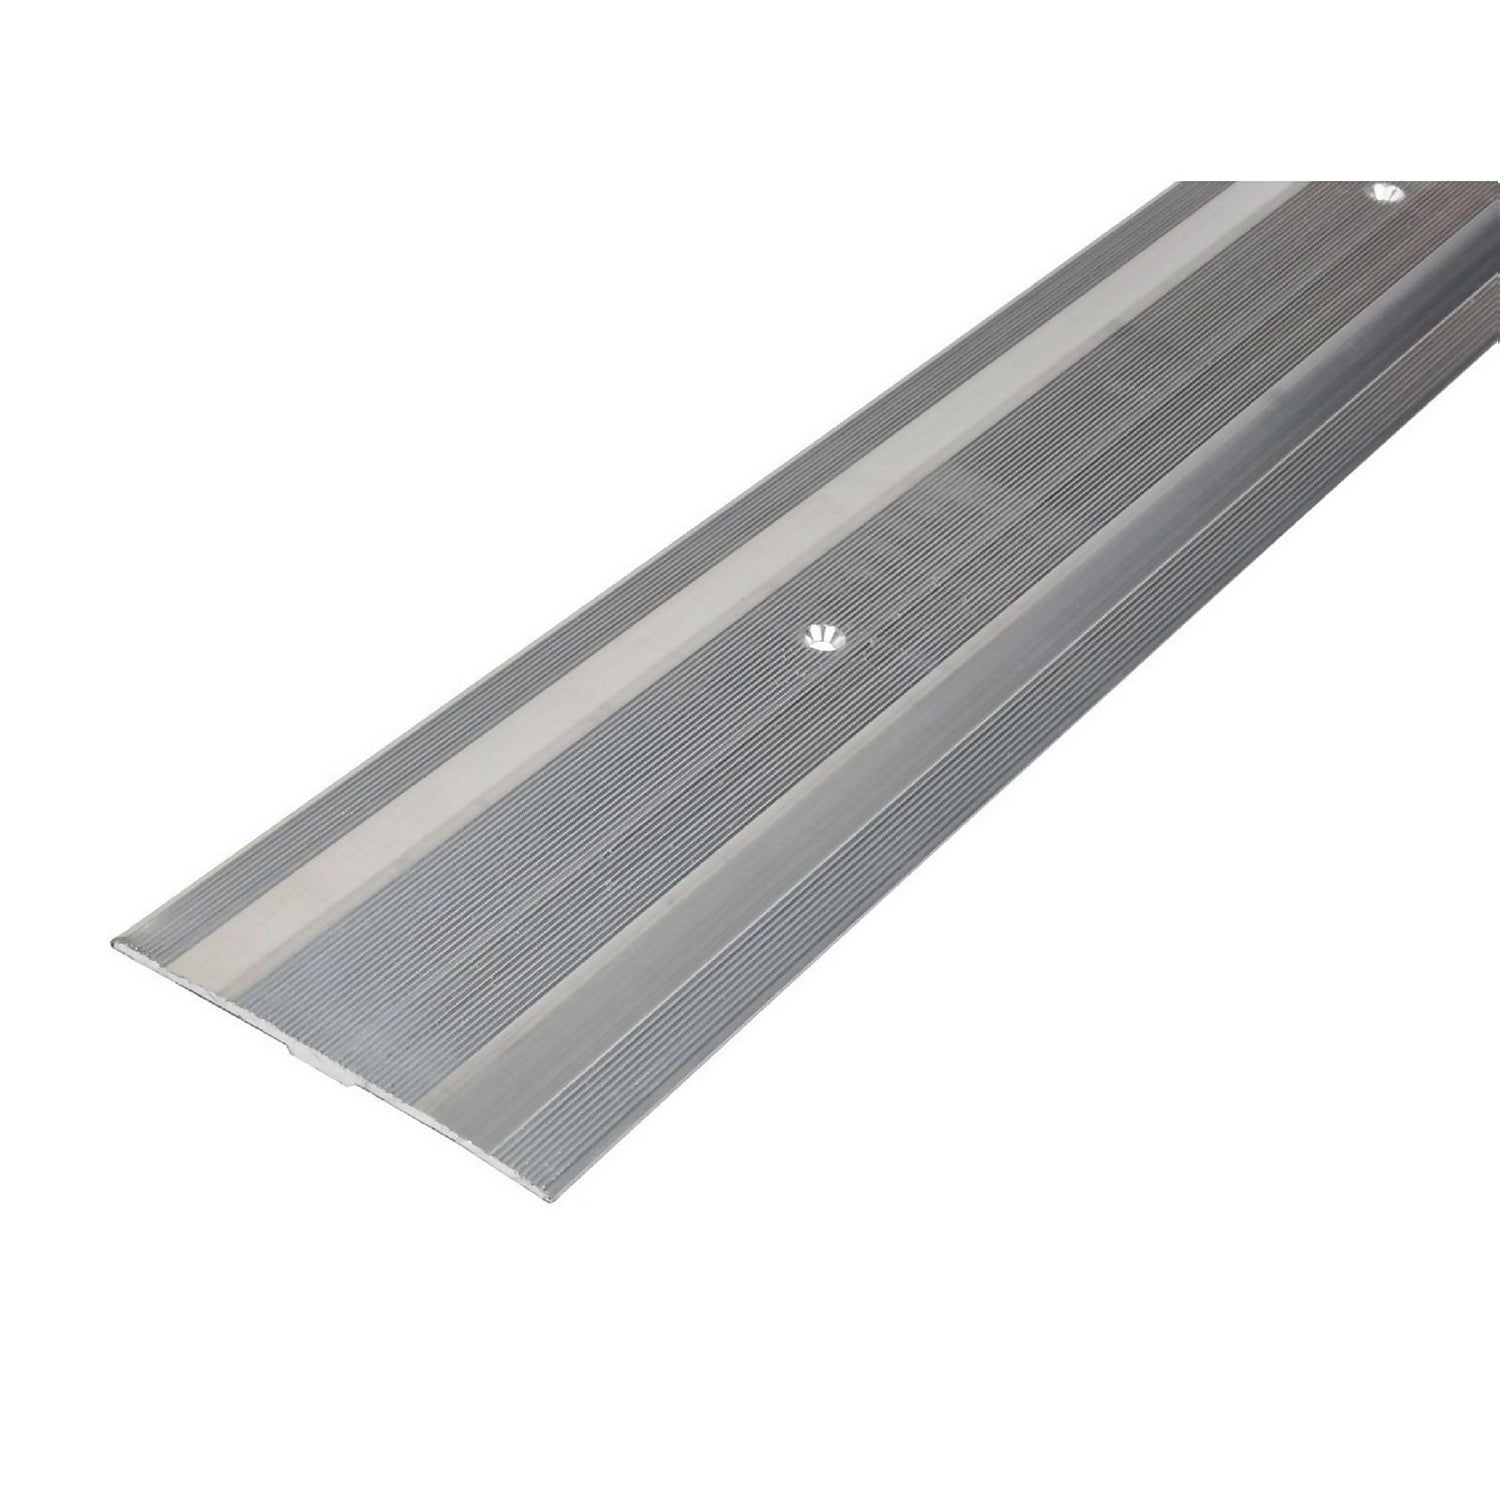 Extra Wide Cover Strip Carpet Edge - Silver 1800mm